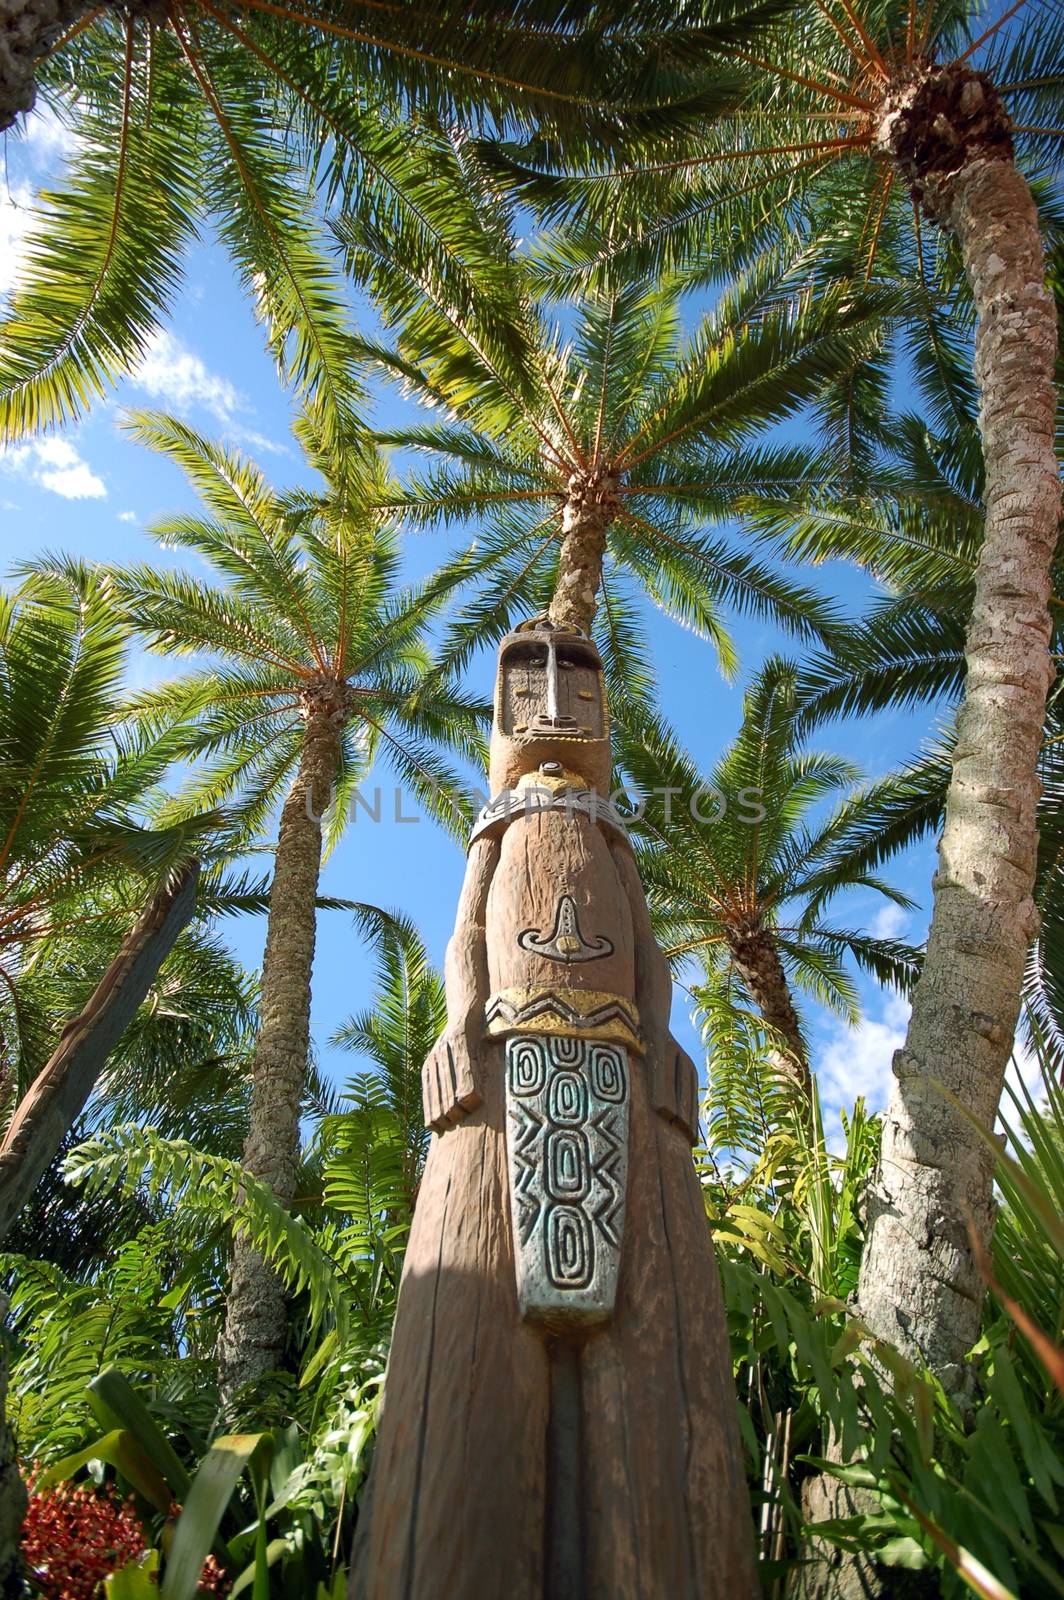 African Wood Sculpture Between Palm Trees. African Theme